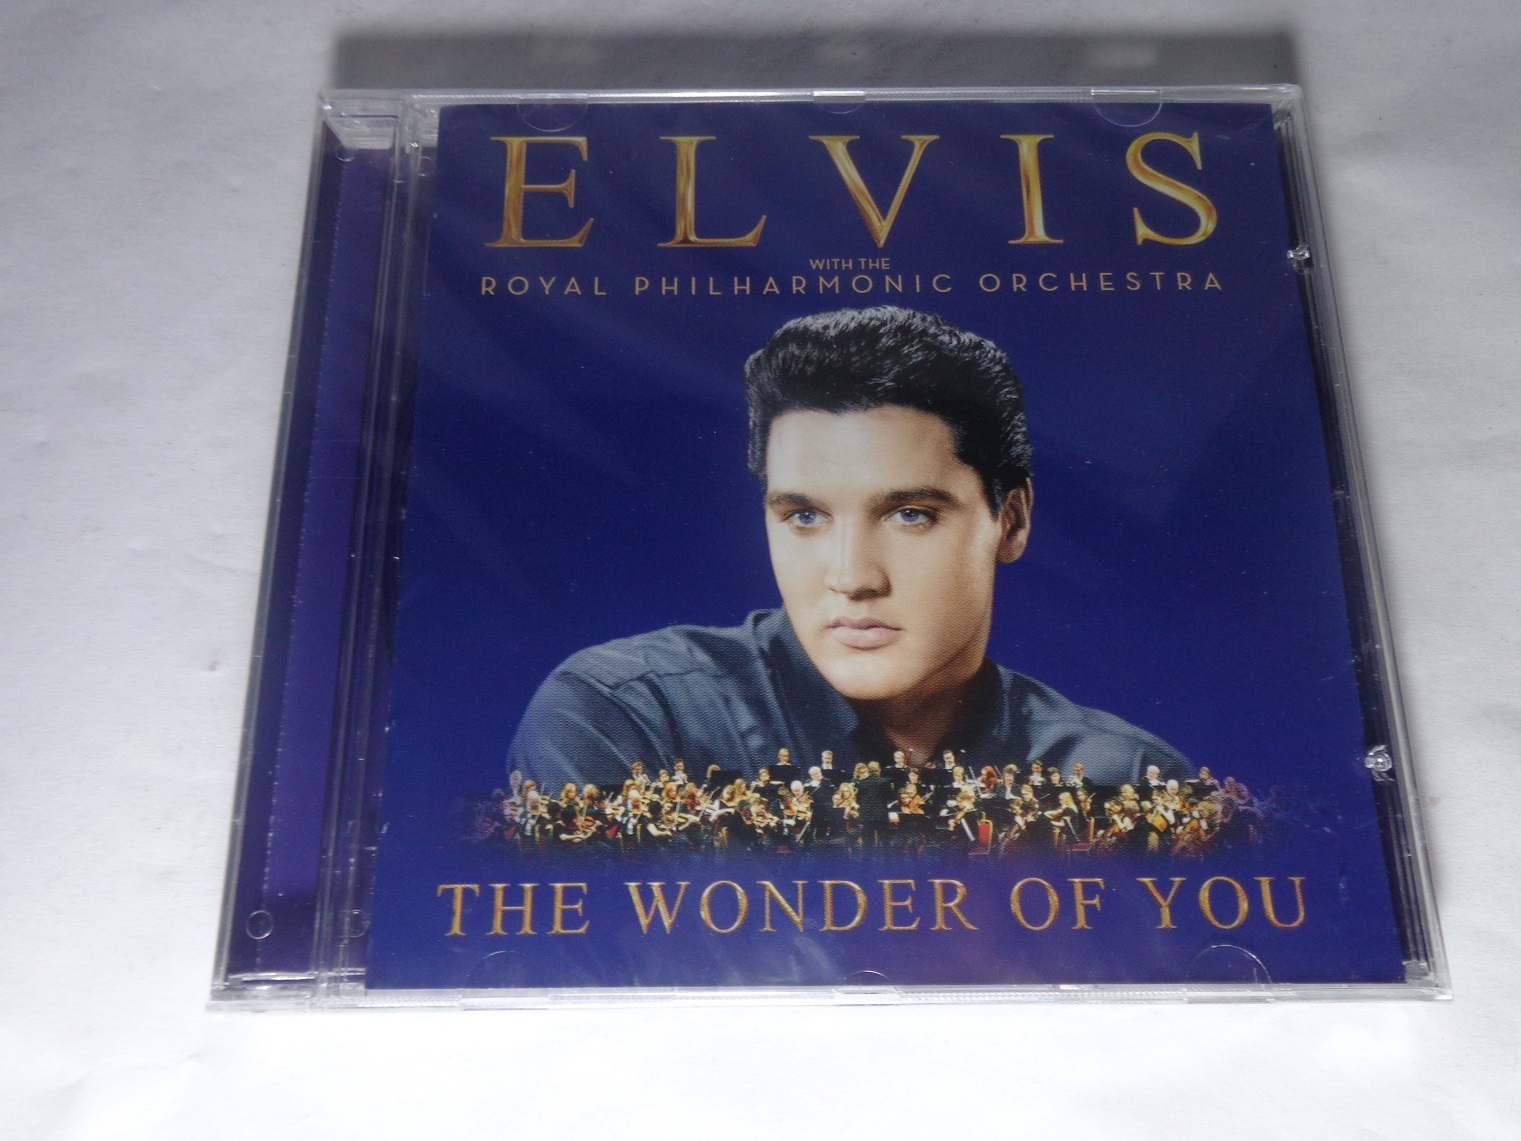 CD - Elvis Presley with the Royal Philharmonic Orchestra - The Wonder of You (Lacrado)